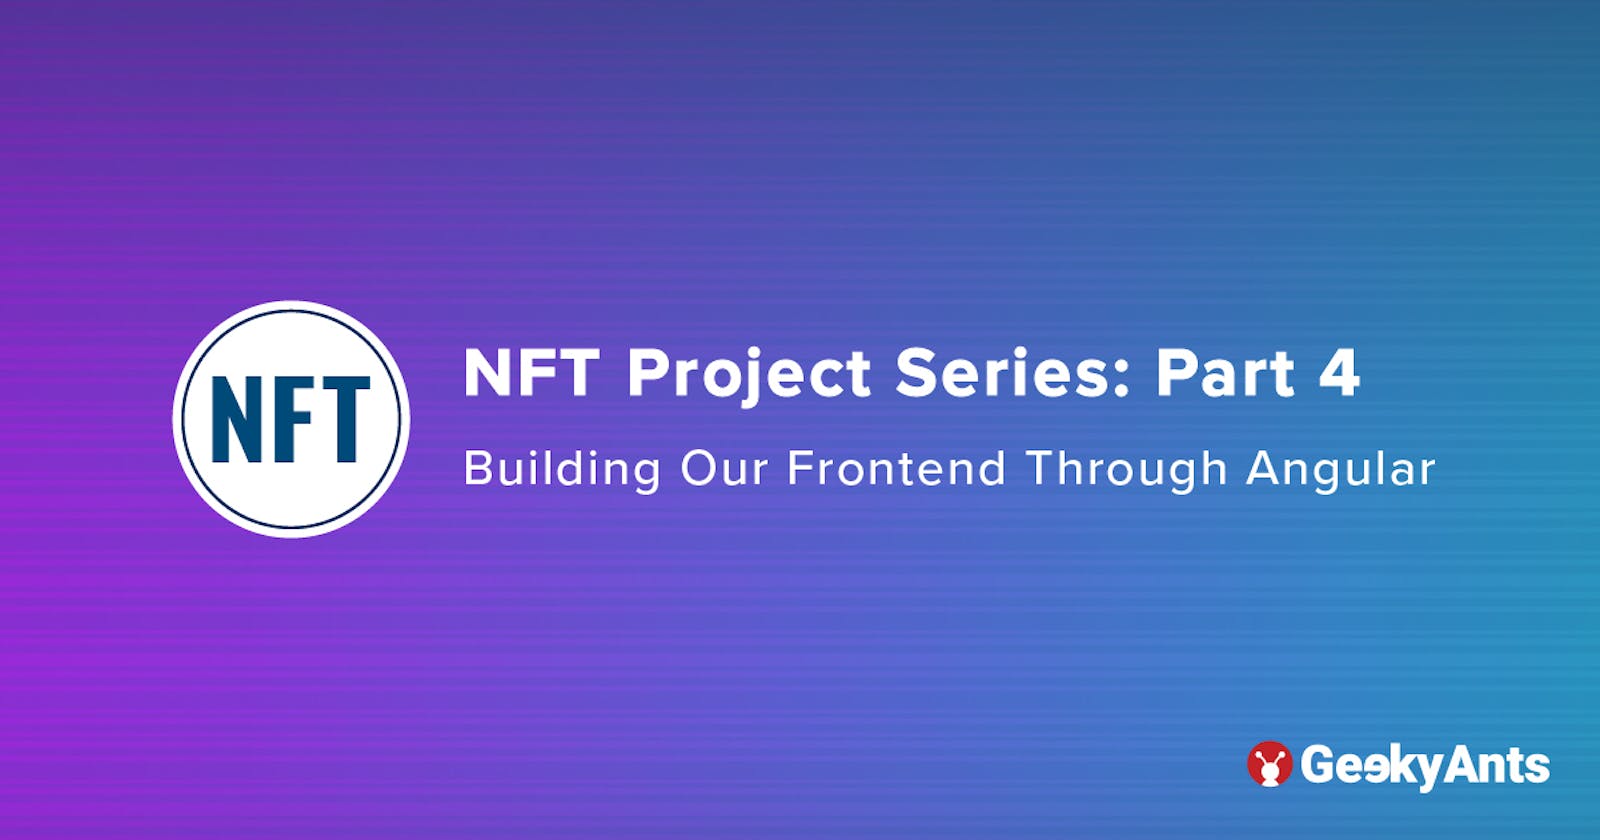 NFT Project Series Part 4: Building Our Frontend Through Angular